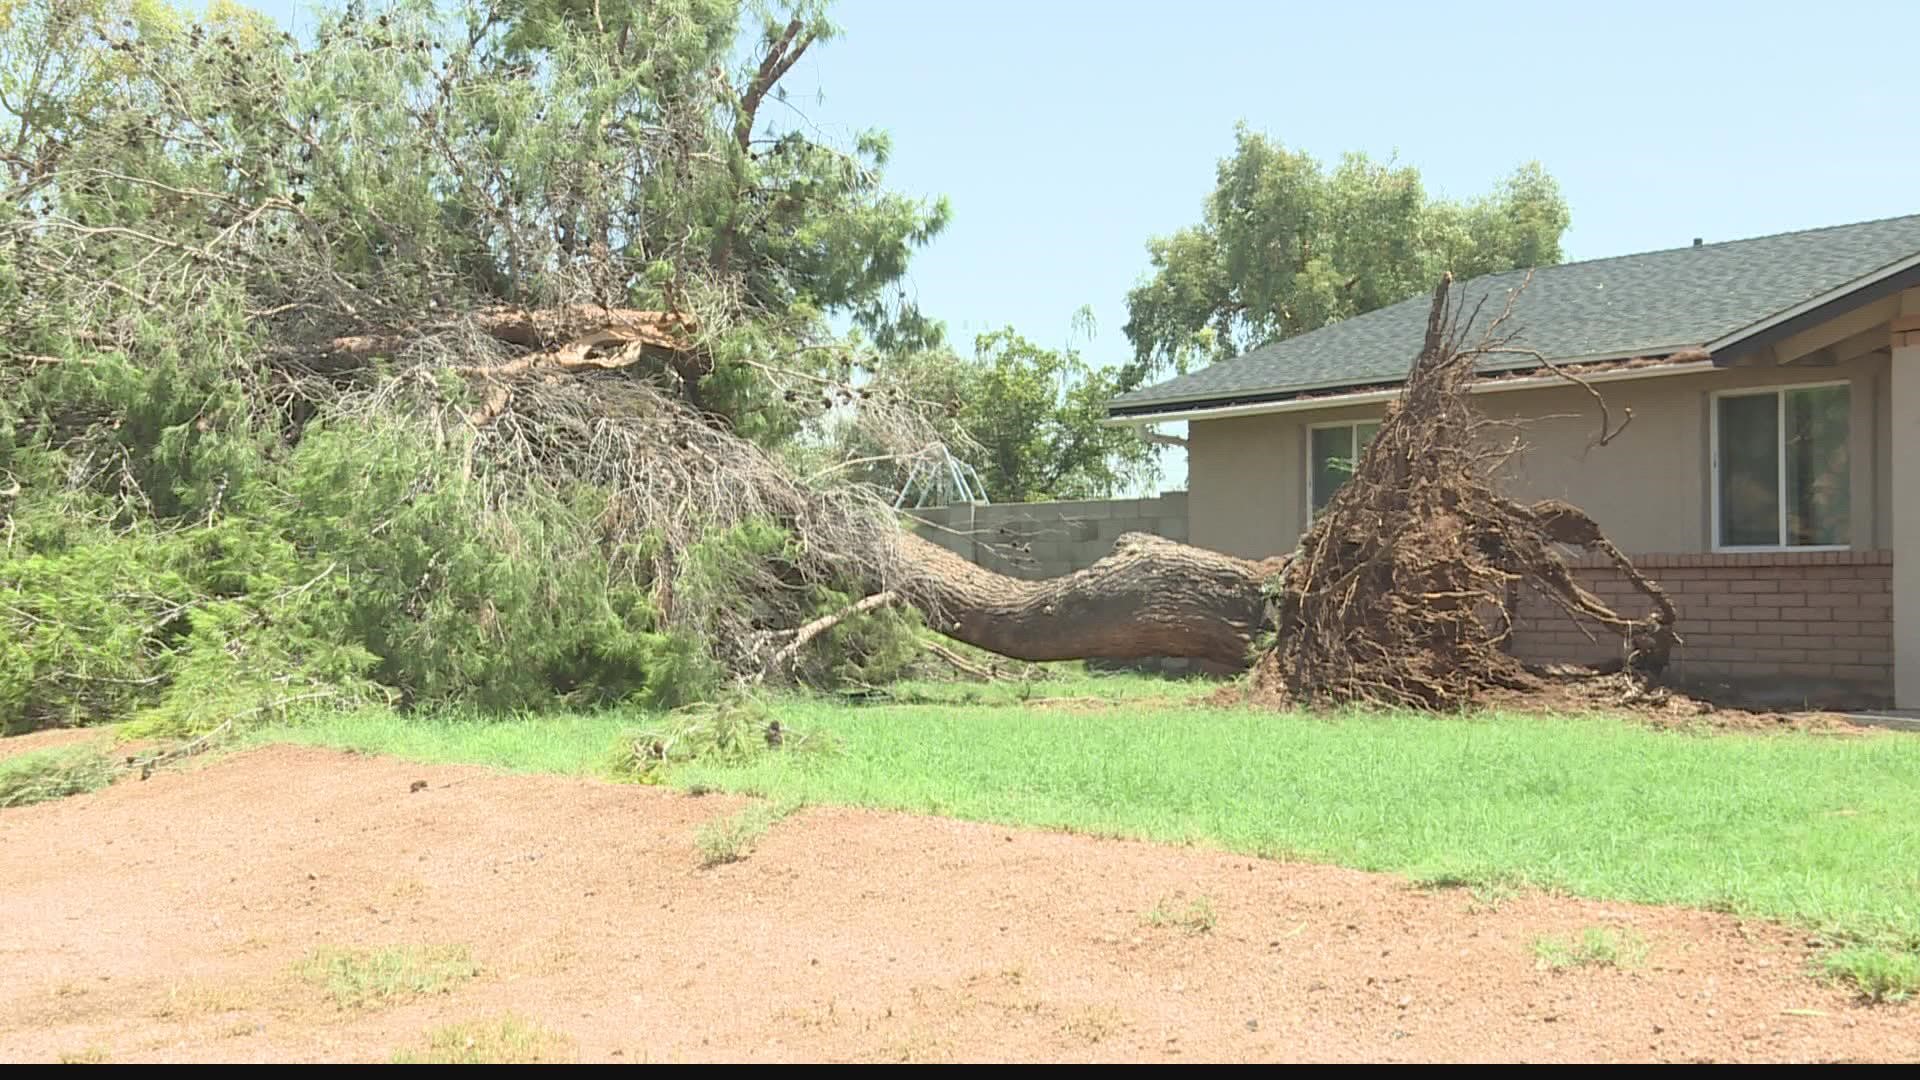 Wednesday's storm left behind a mess not only on the highway but also for homes and businesses. People in Mesa and Gilbert spent the day cleaning up the damage.